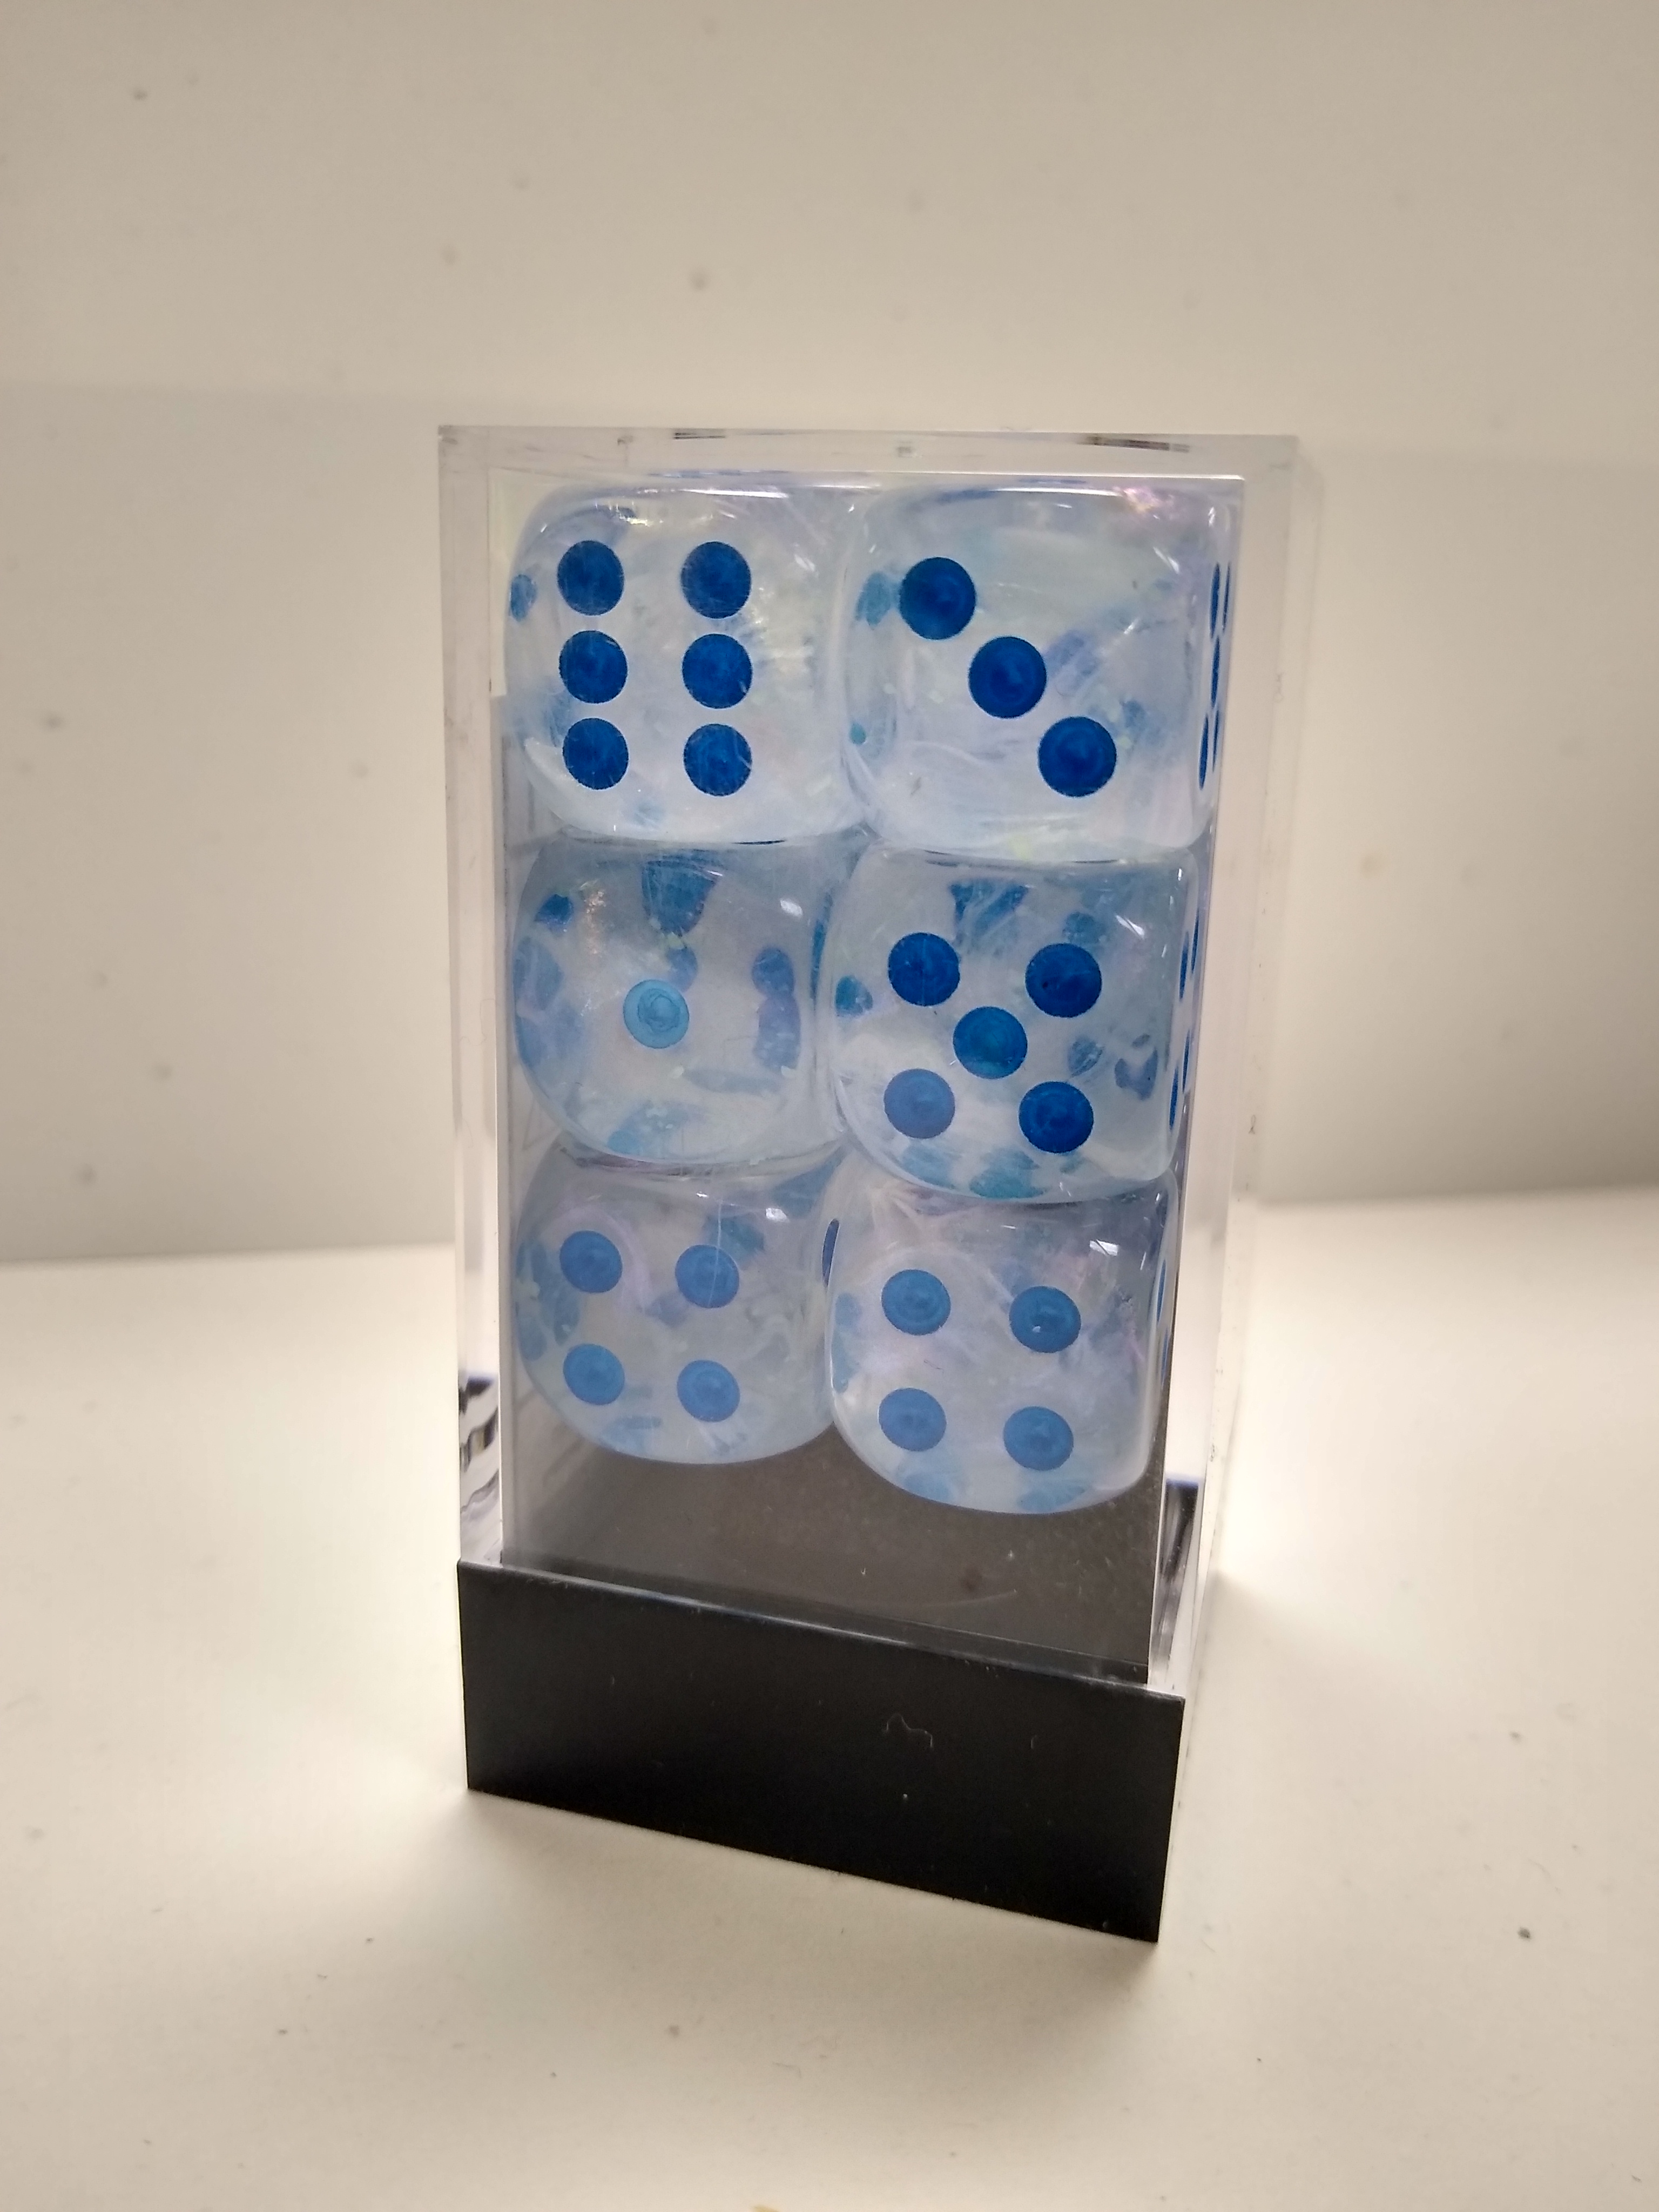 Block of 12 6-Sided 16Mm Dice - Chessex Borealis Icicle With Light Blue Numerals Luminary Glow 27781